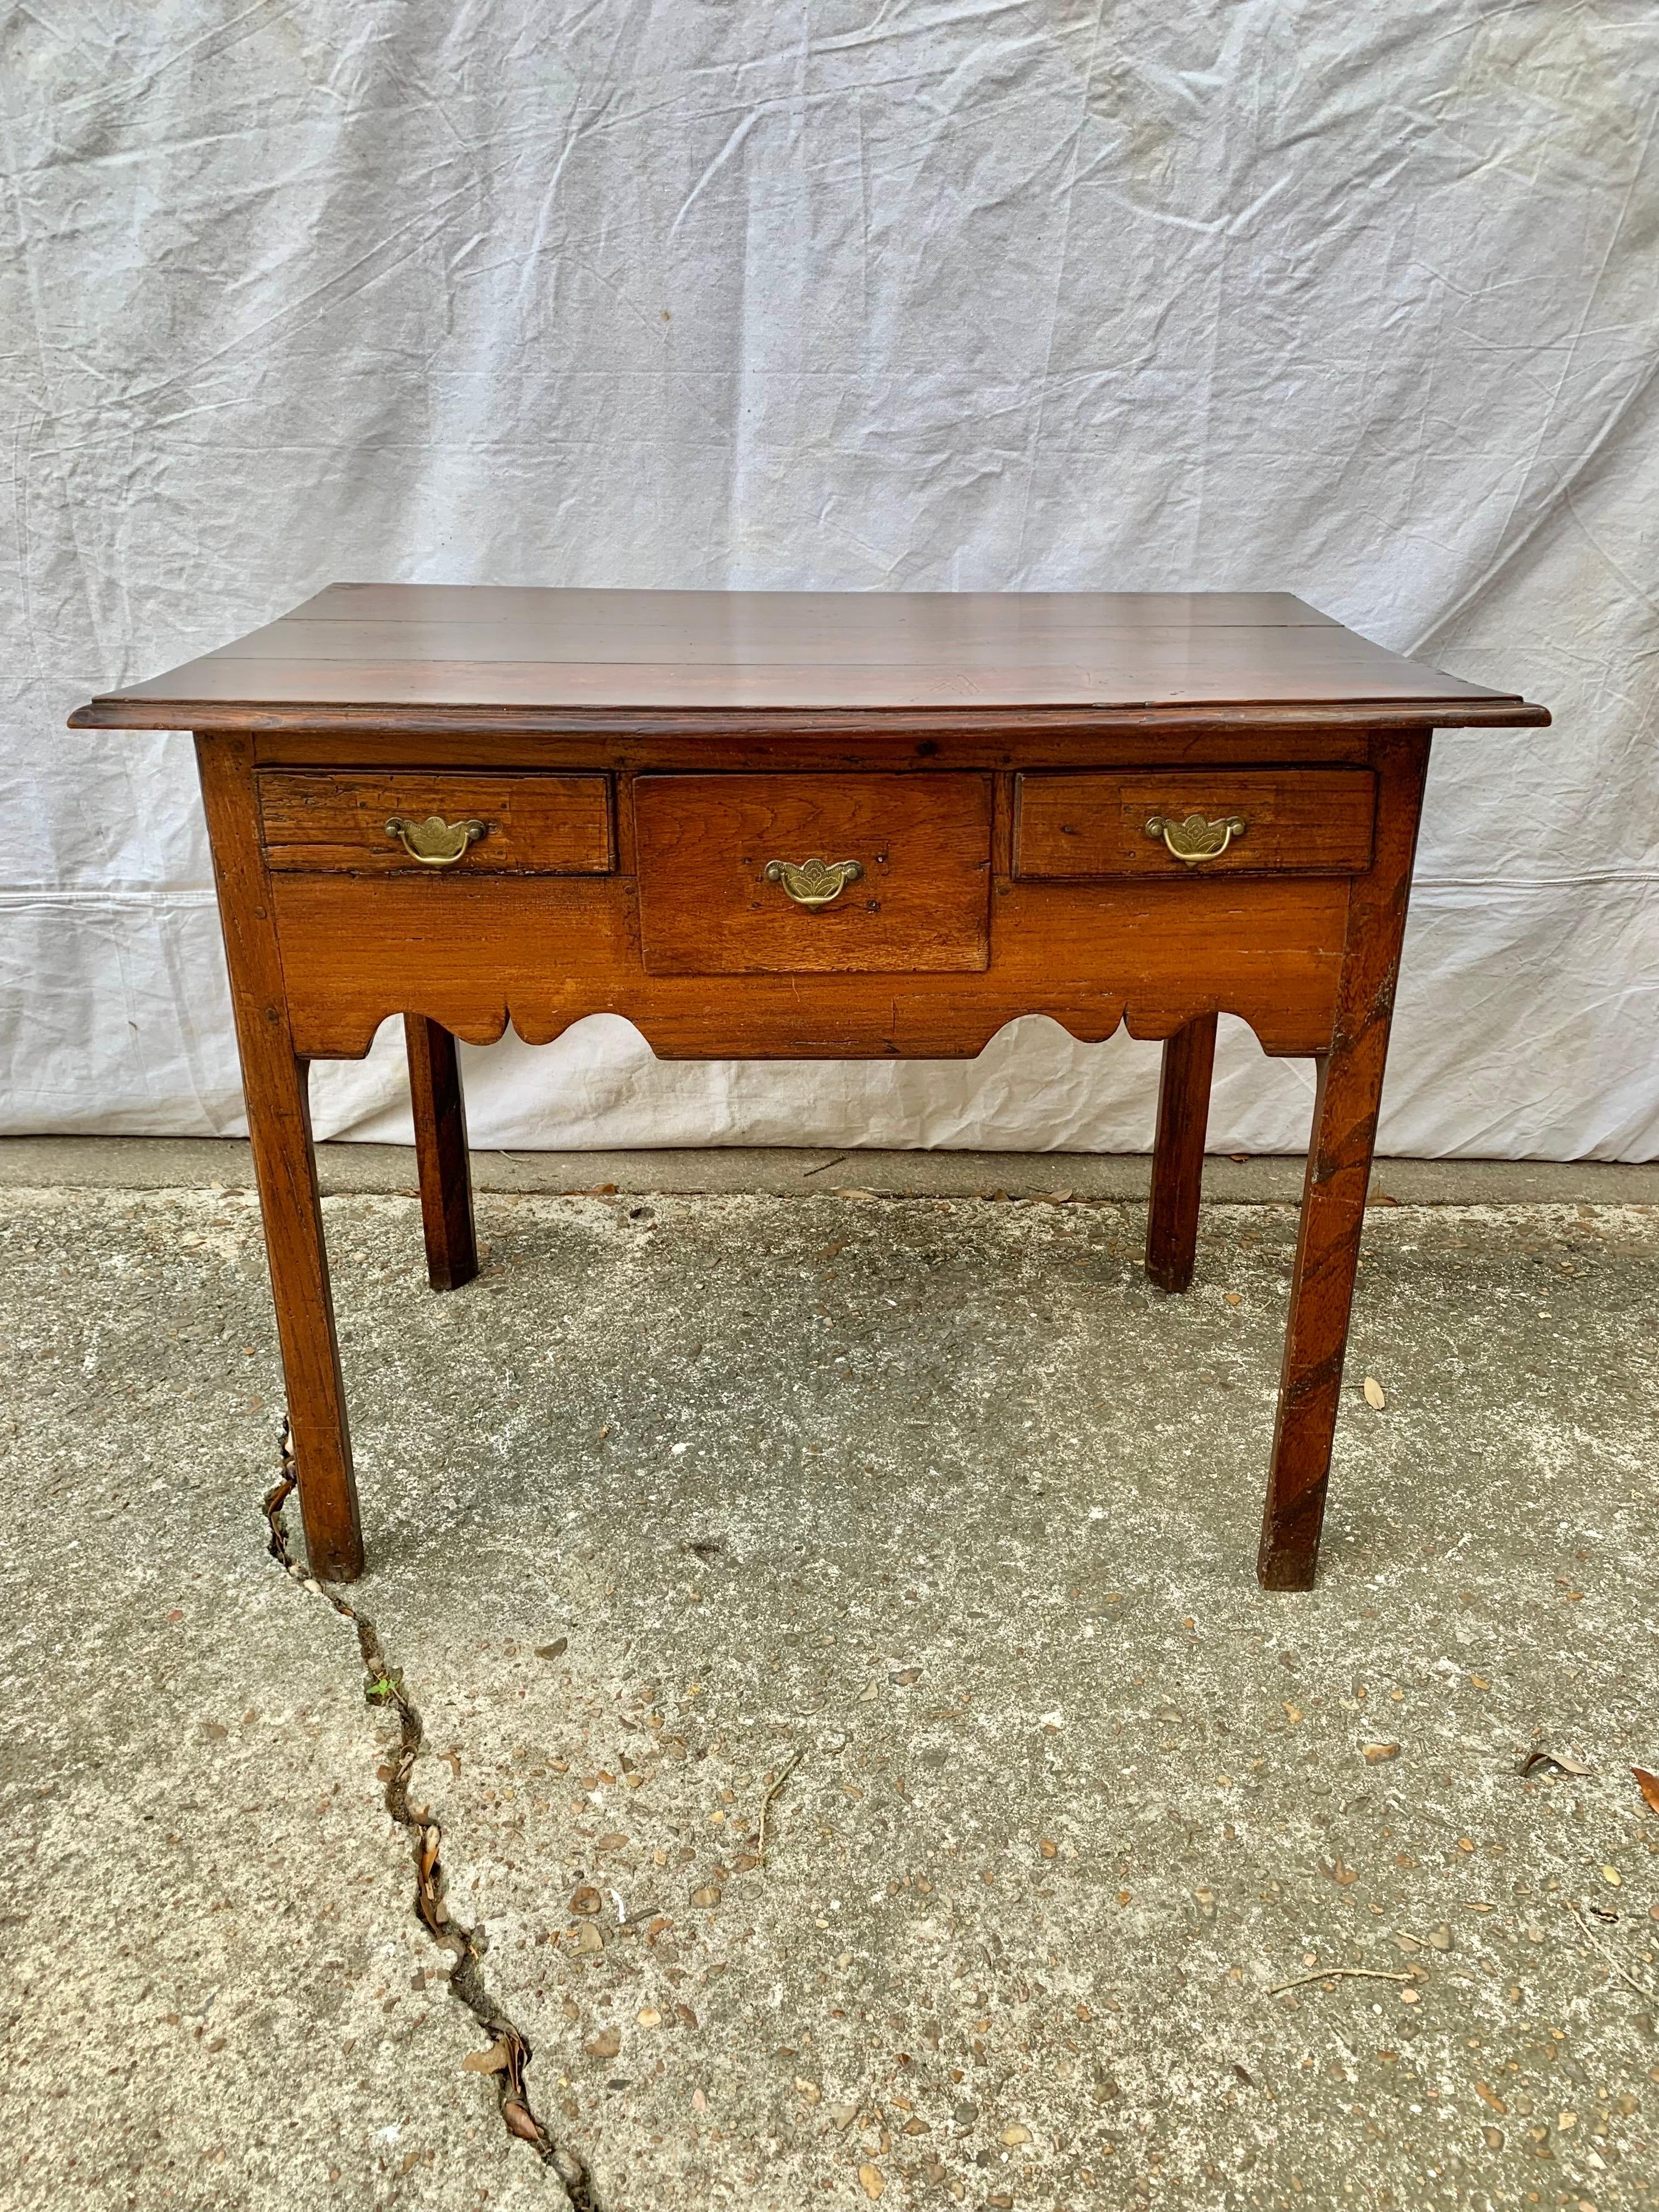 Found in England, this side table was crafted from old growth oak by English artisans in the 1800's. This table, often called a lowboy, features a rectangular three plank top above three drawers and the entire piece rest on four carved legs. The